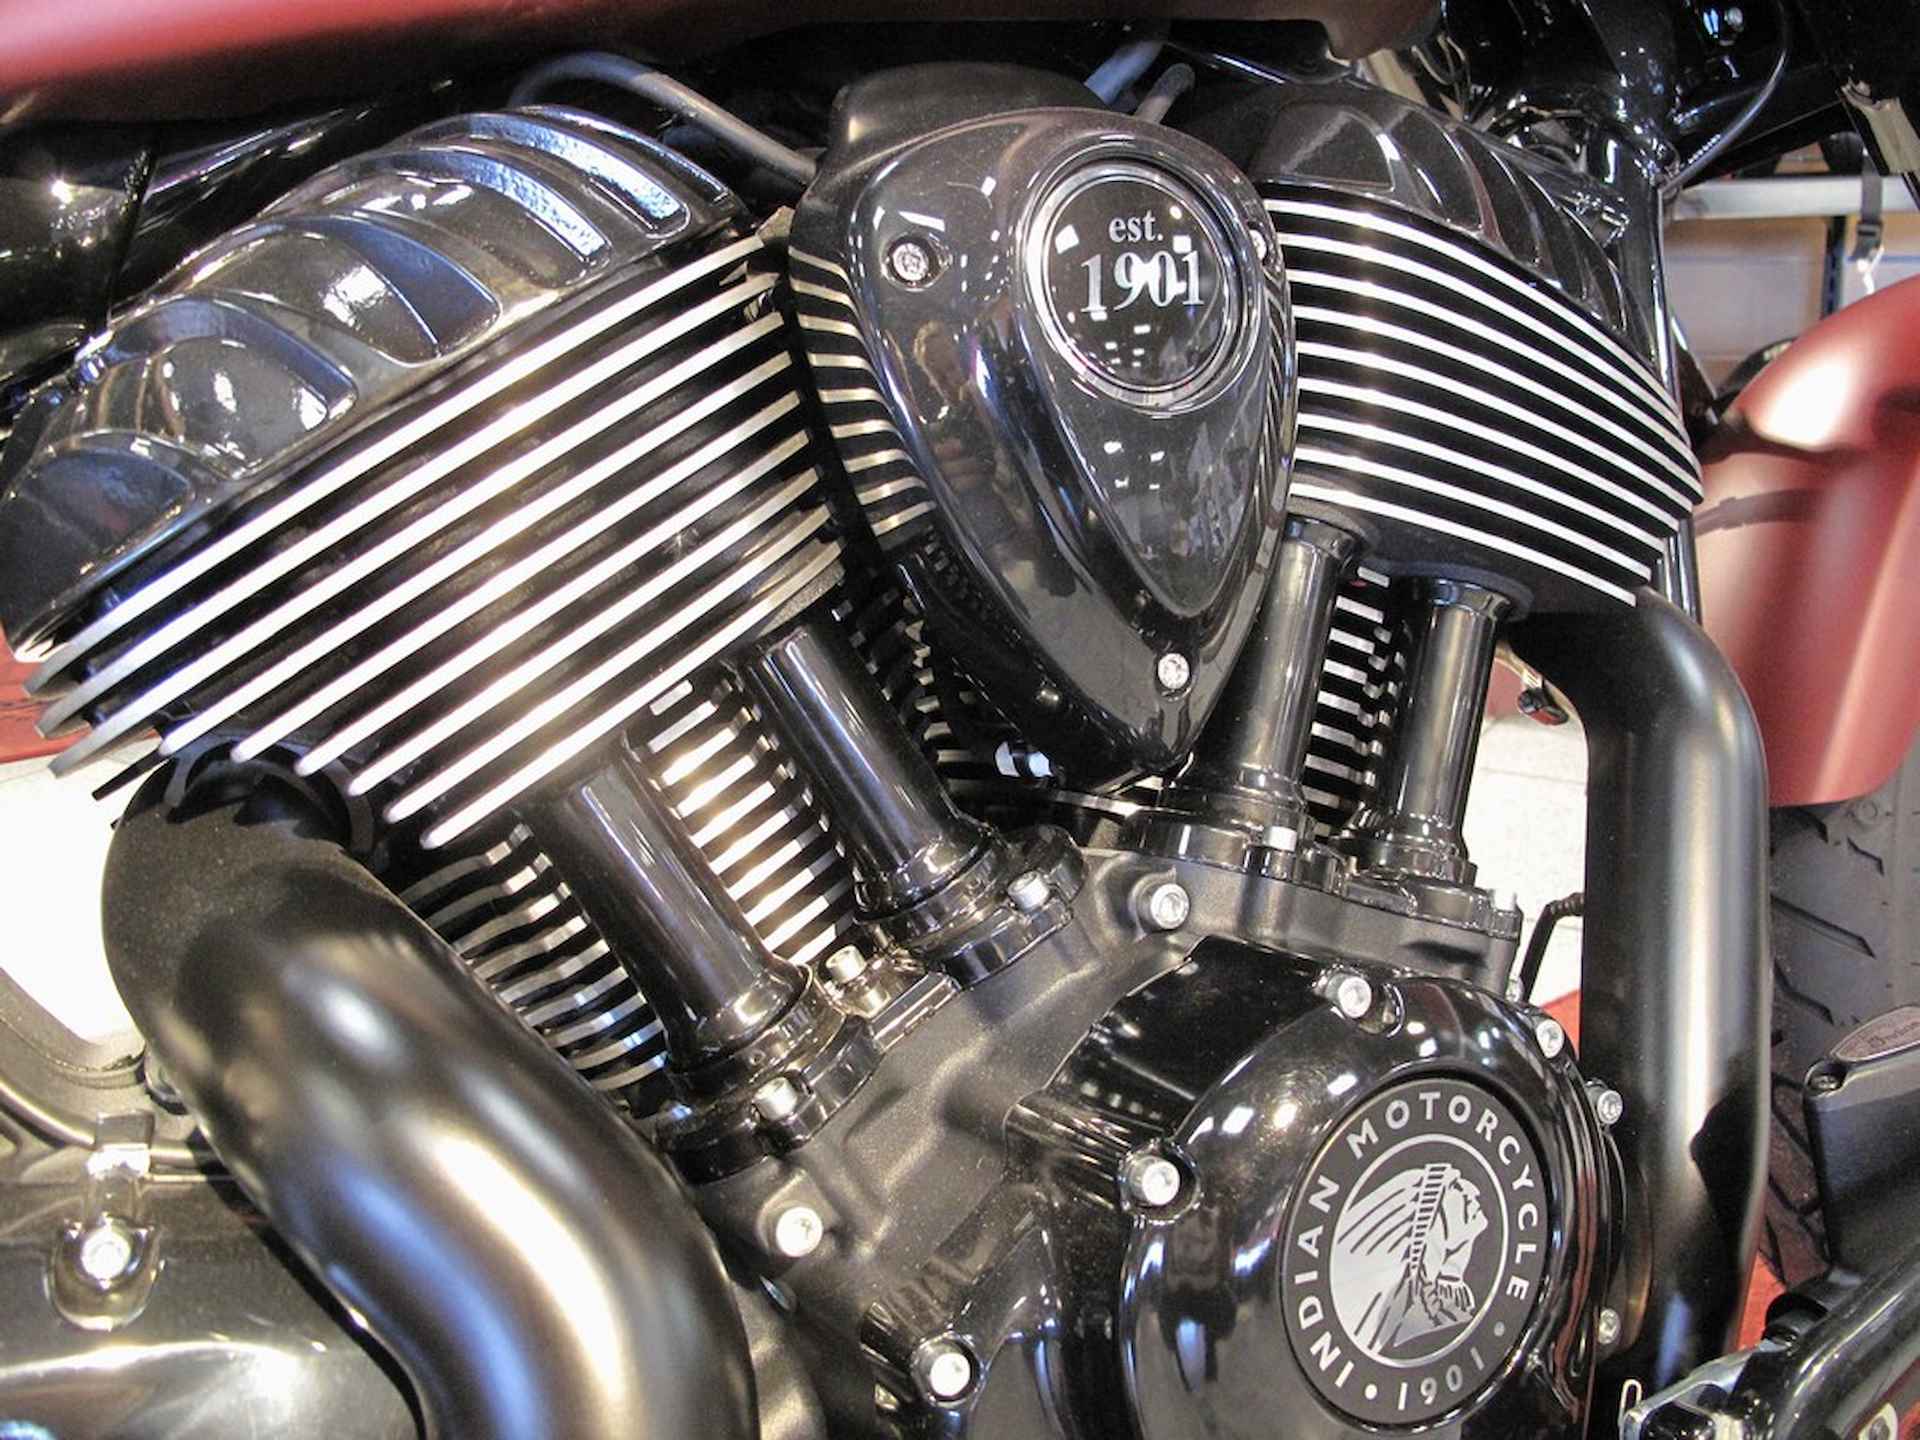 Indian Chief Bobber Dark Horse The official Indian Motorcycles Dealer! - 8/13